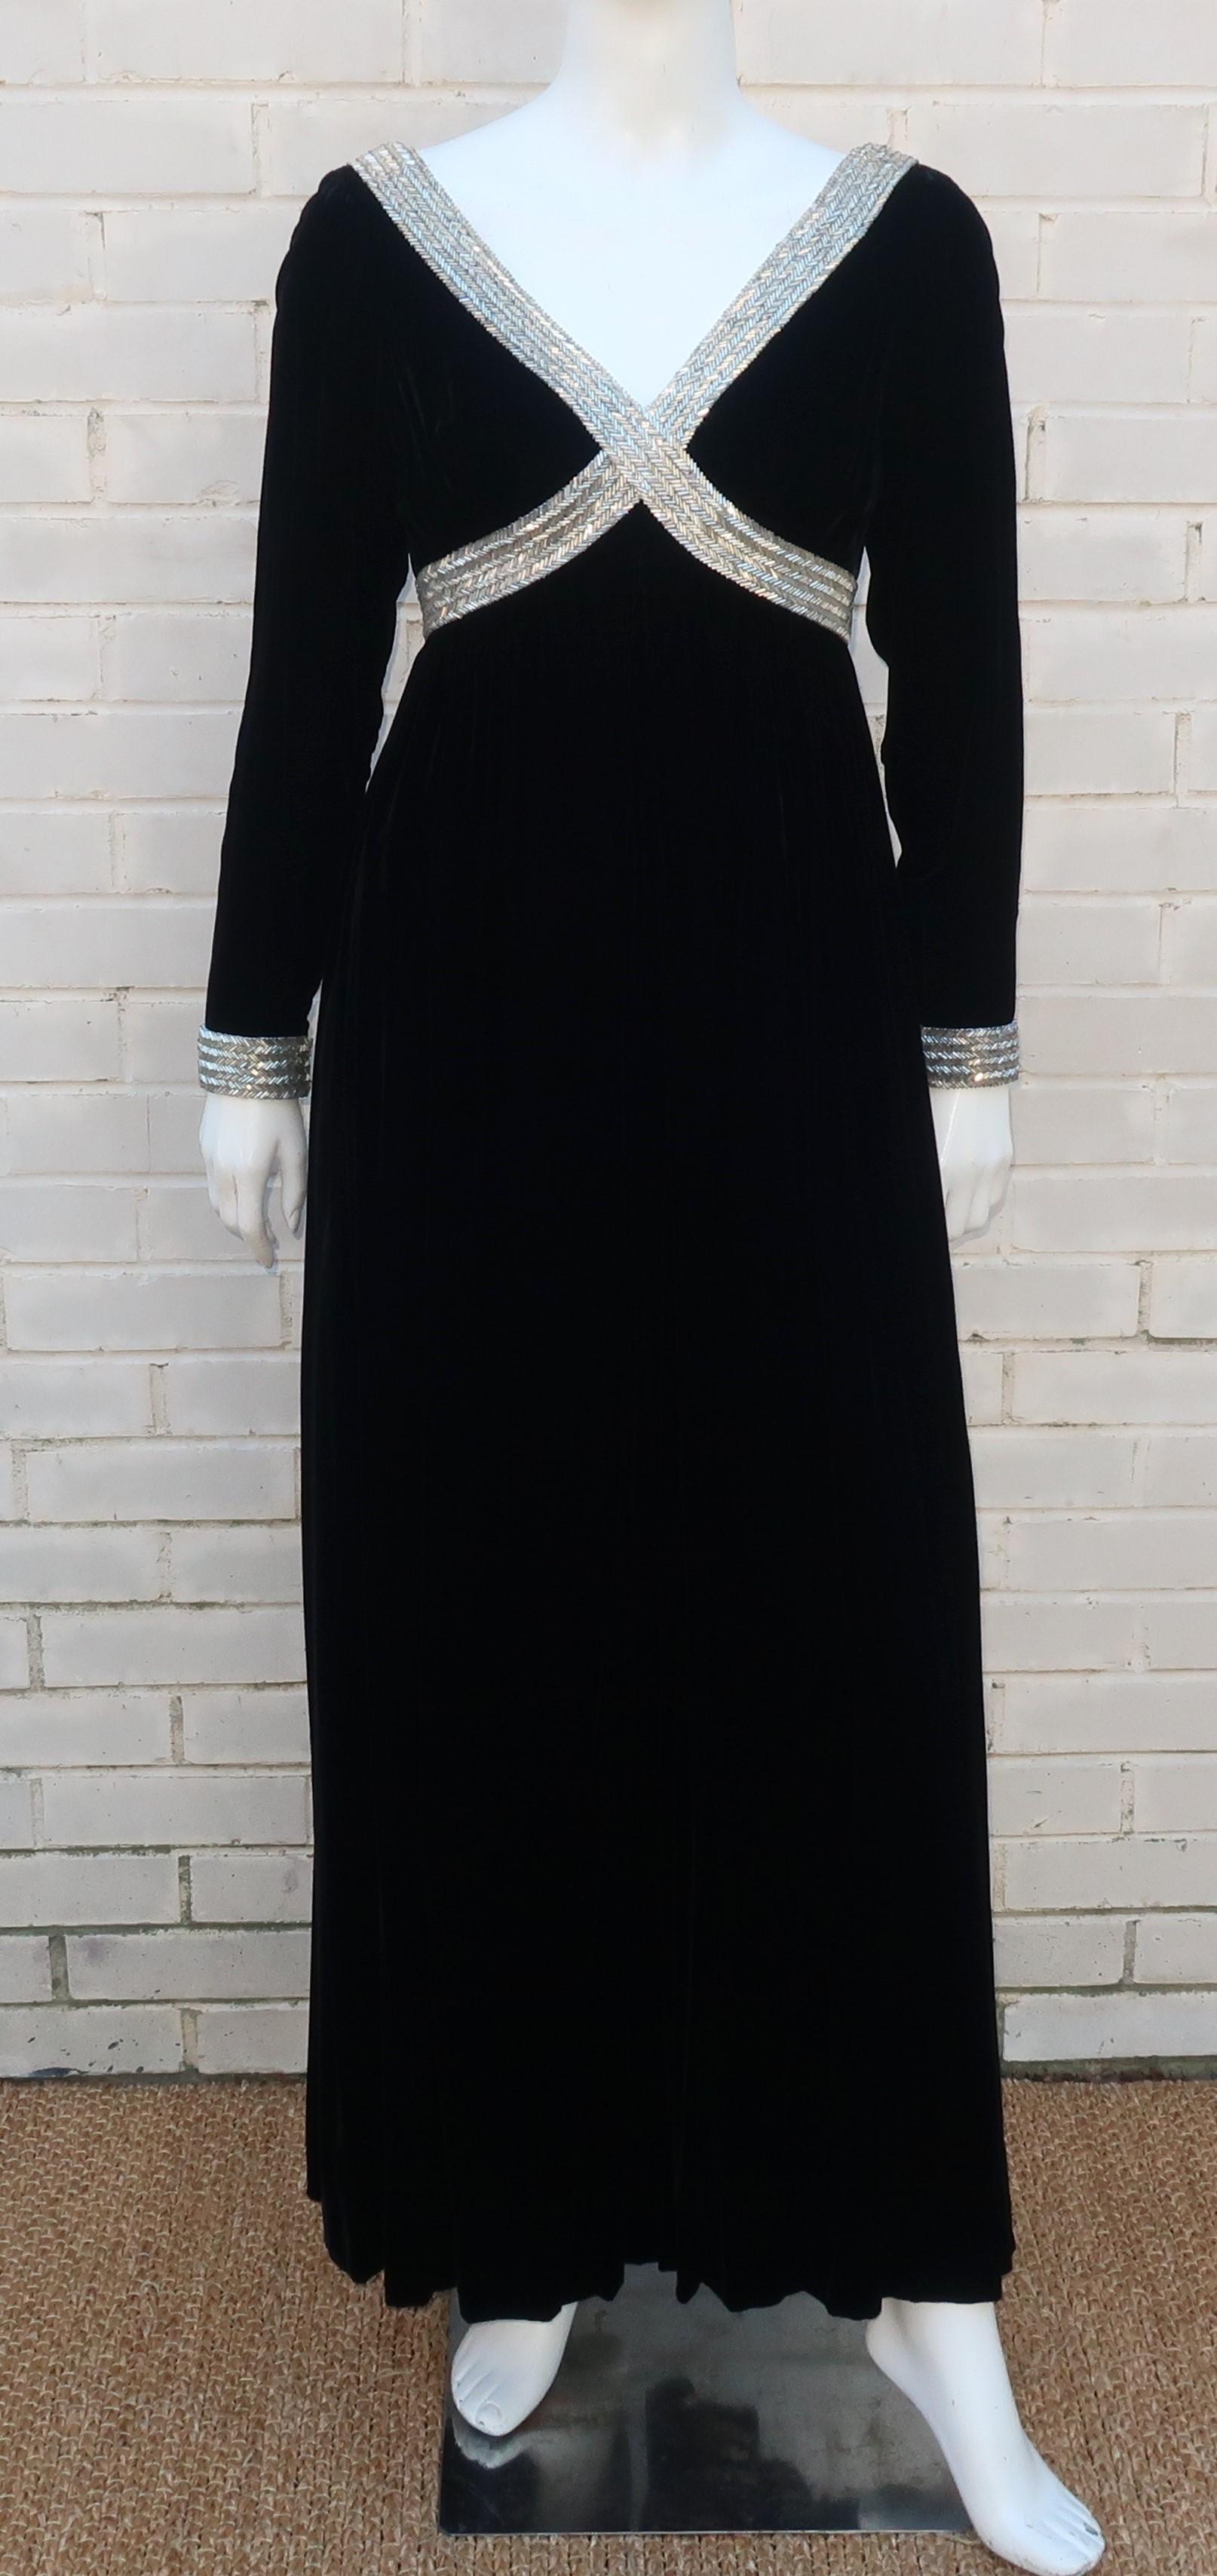 1960's ultra glam black velvet jumpsuit with intricate silver beading at the bodice and cuffs.  The jumpsuit zips and hooks at the deep v-back with a voluminous pant leg that is easily mistaken as a full skirt and hidden side pockets.  The